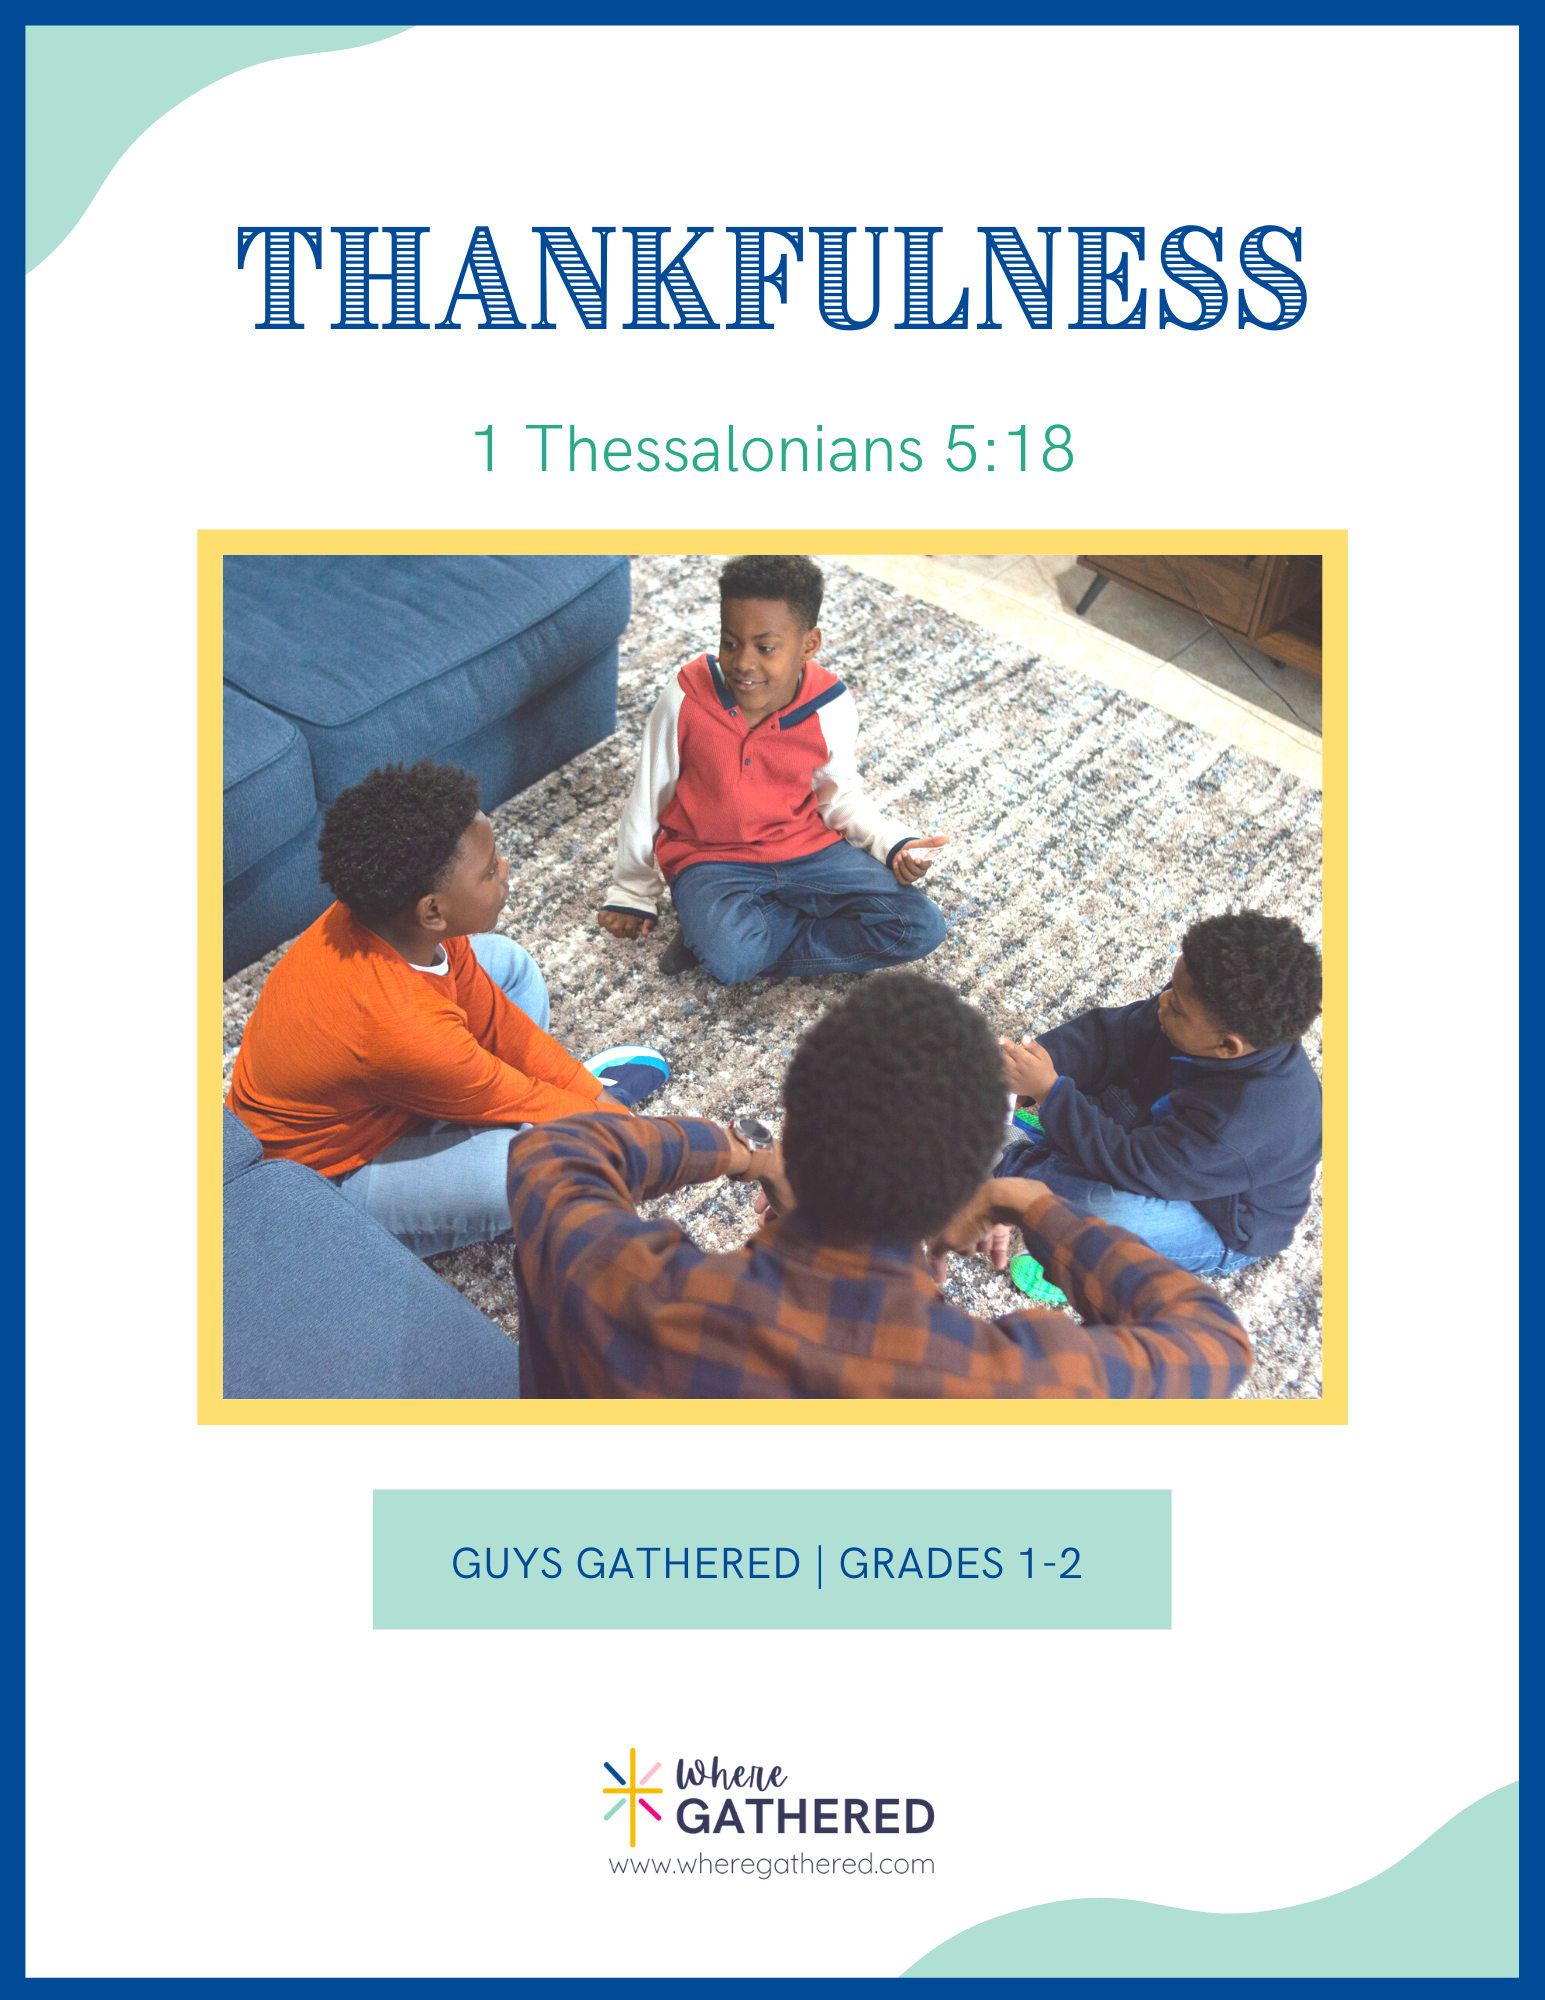 A cover of the Life Group Kit for kids Bible study lesson called Thankfulness for boys.